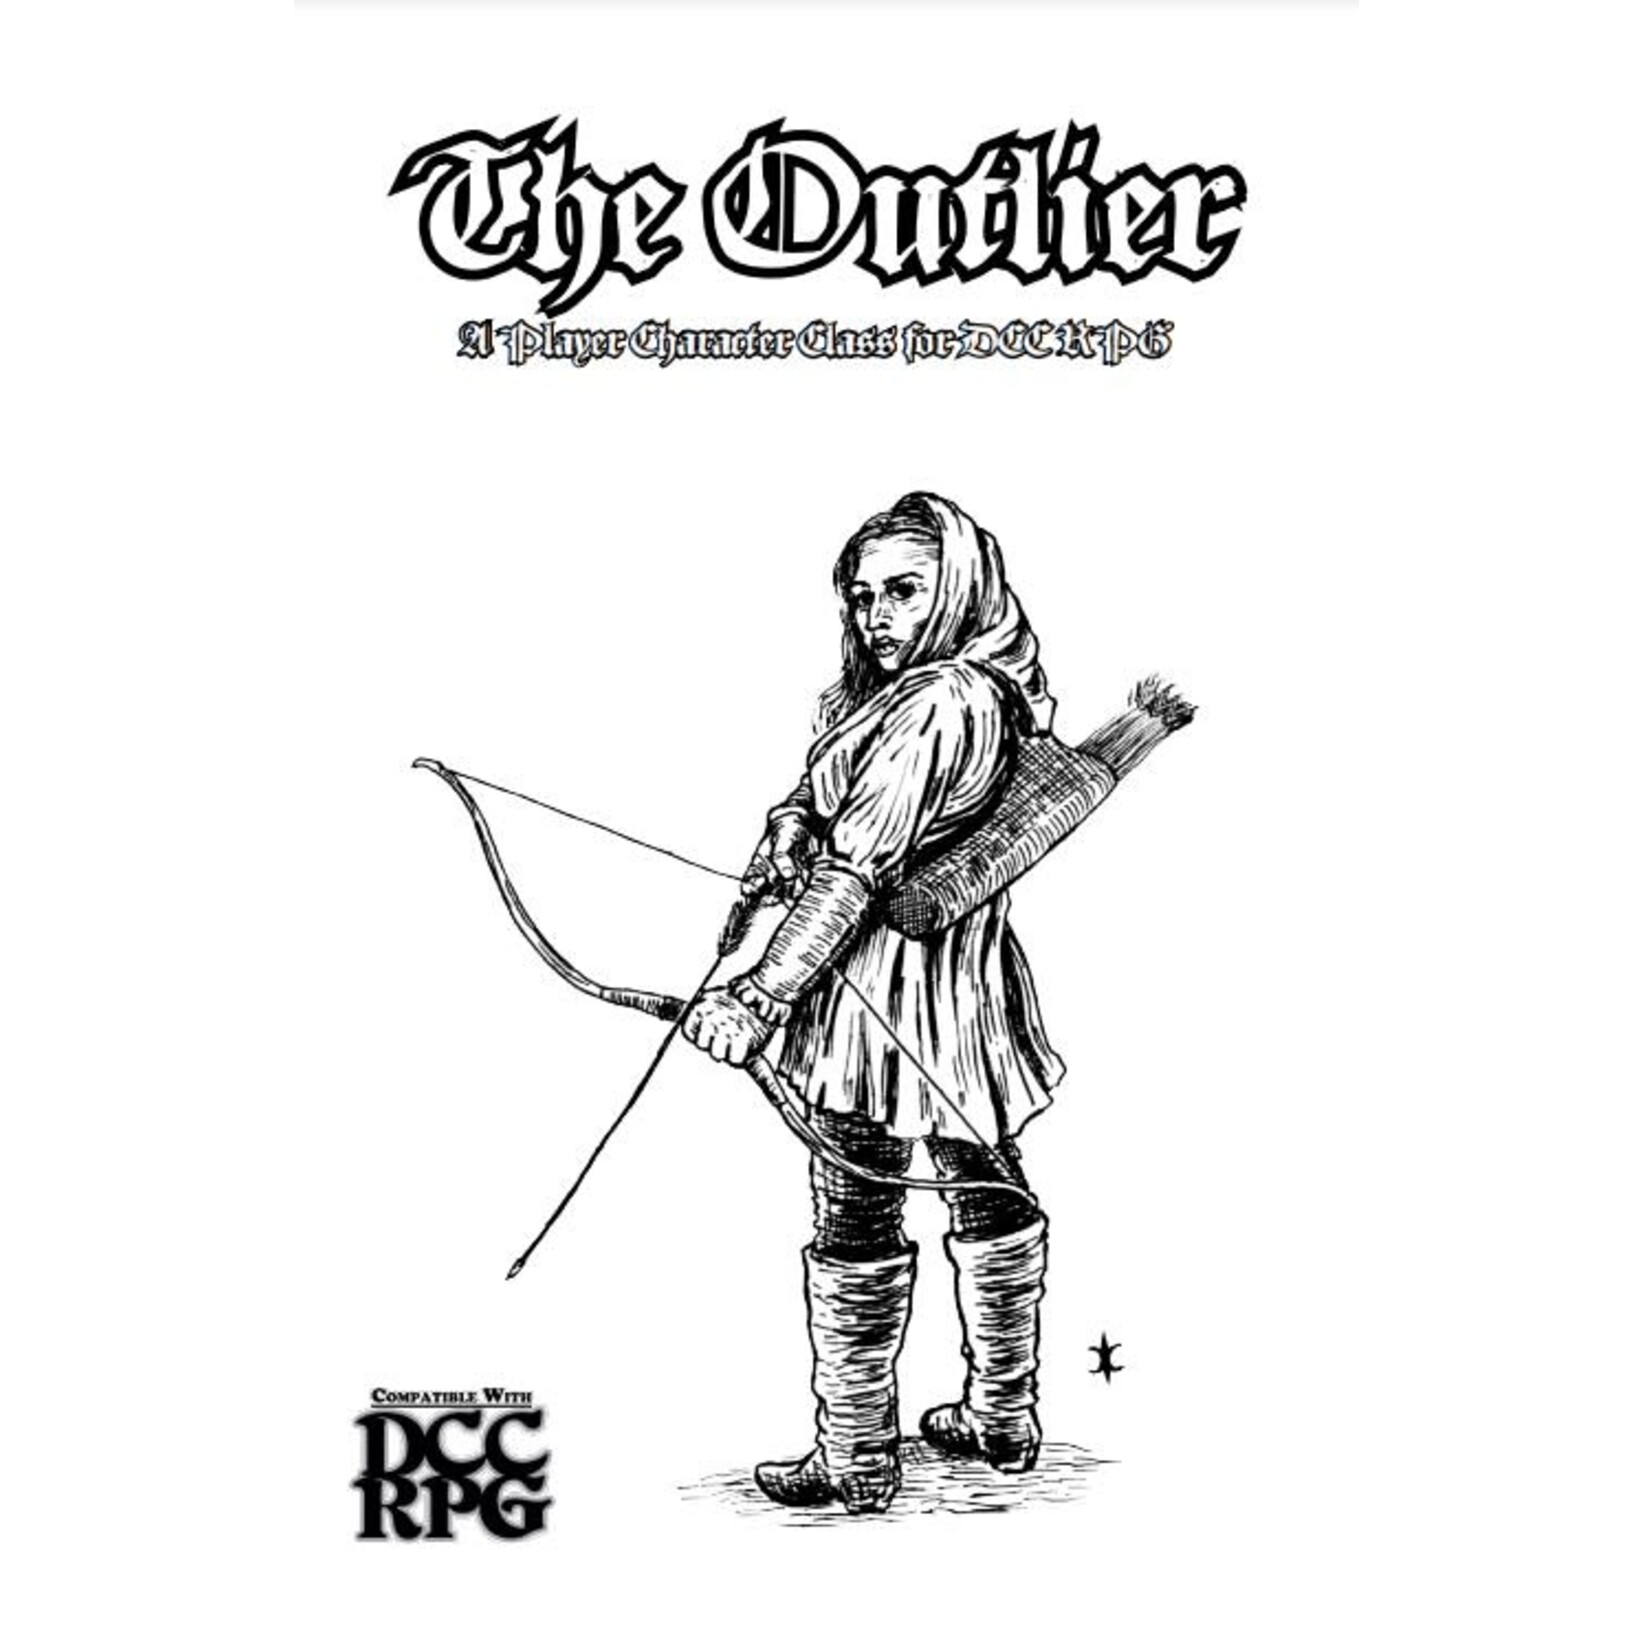 Breaker Press Games The Outlier Character Class (DCC RPG Compatible)